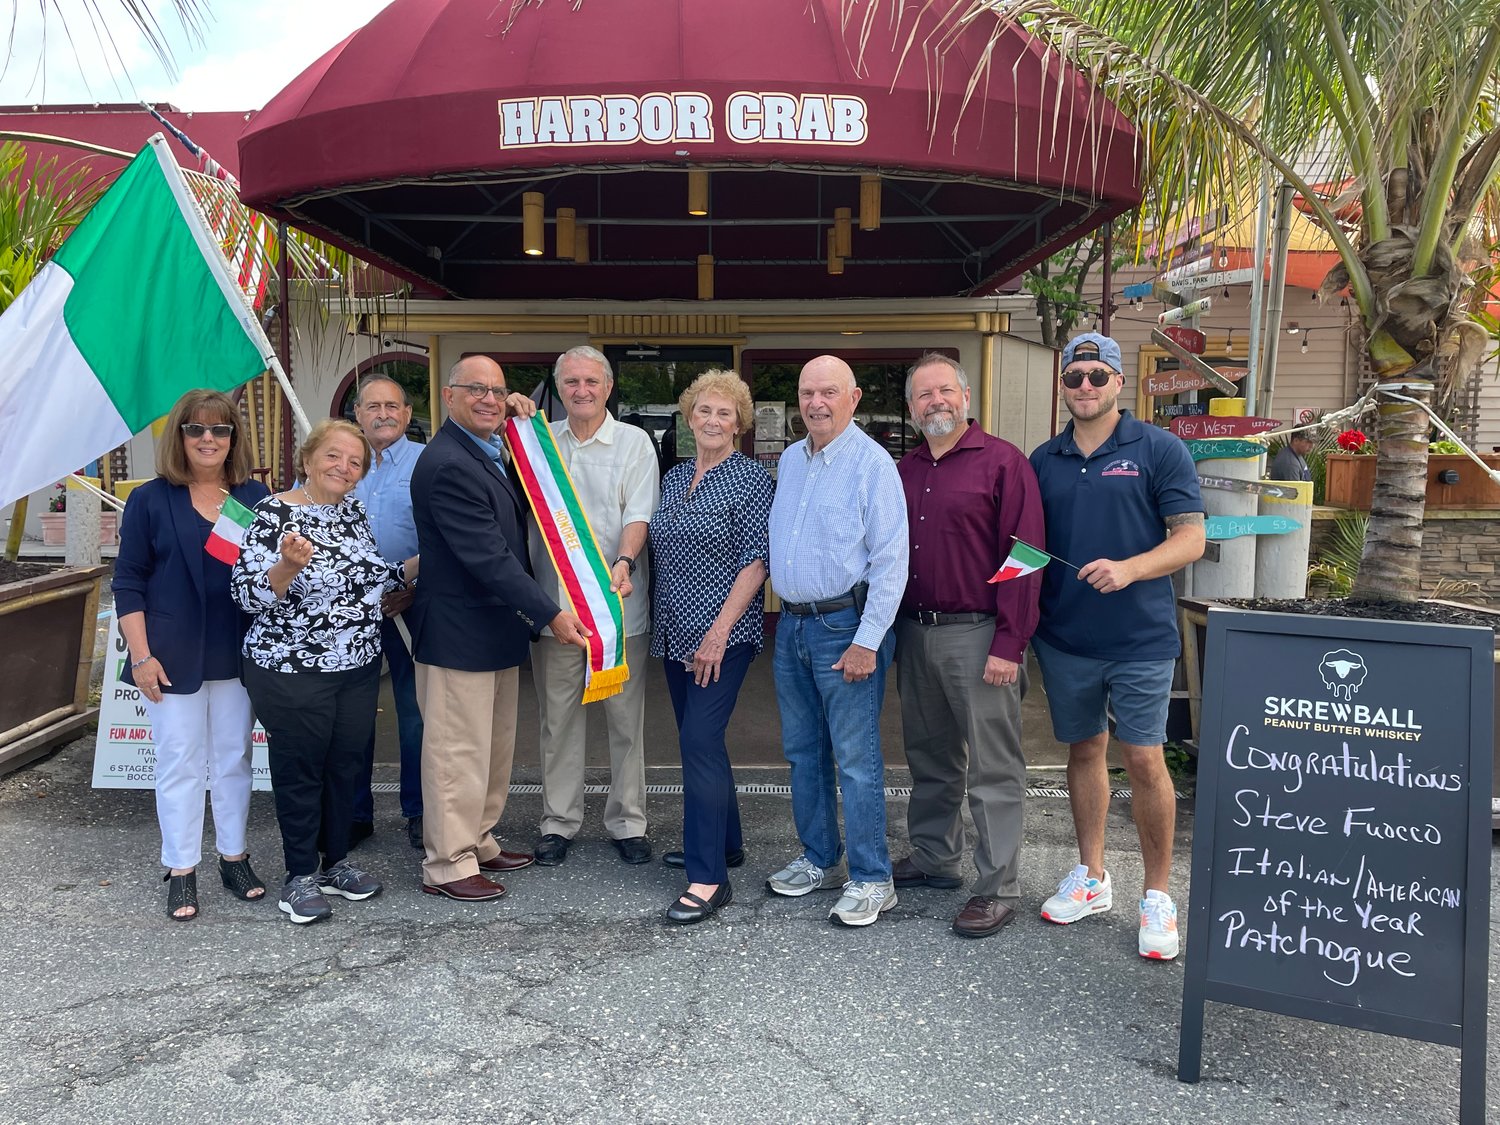 Past grand marshals, organizers of the festival, Greater Patchogue Chamber of Commerce executive director David Kennedy and last year’s grand marshal Joe Brandi gathered at Mark Miller’s Harbor Crab to pass the sash to Steve Fuoco